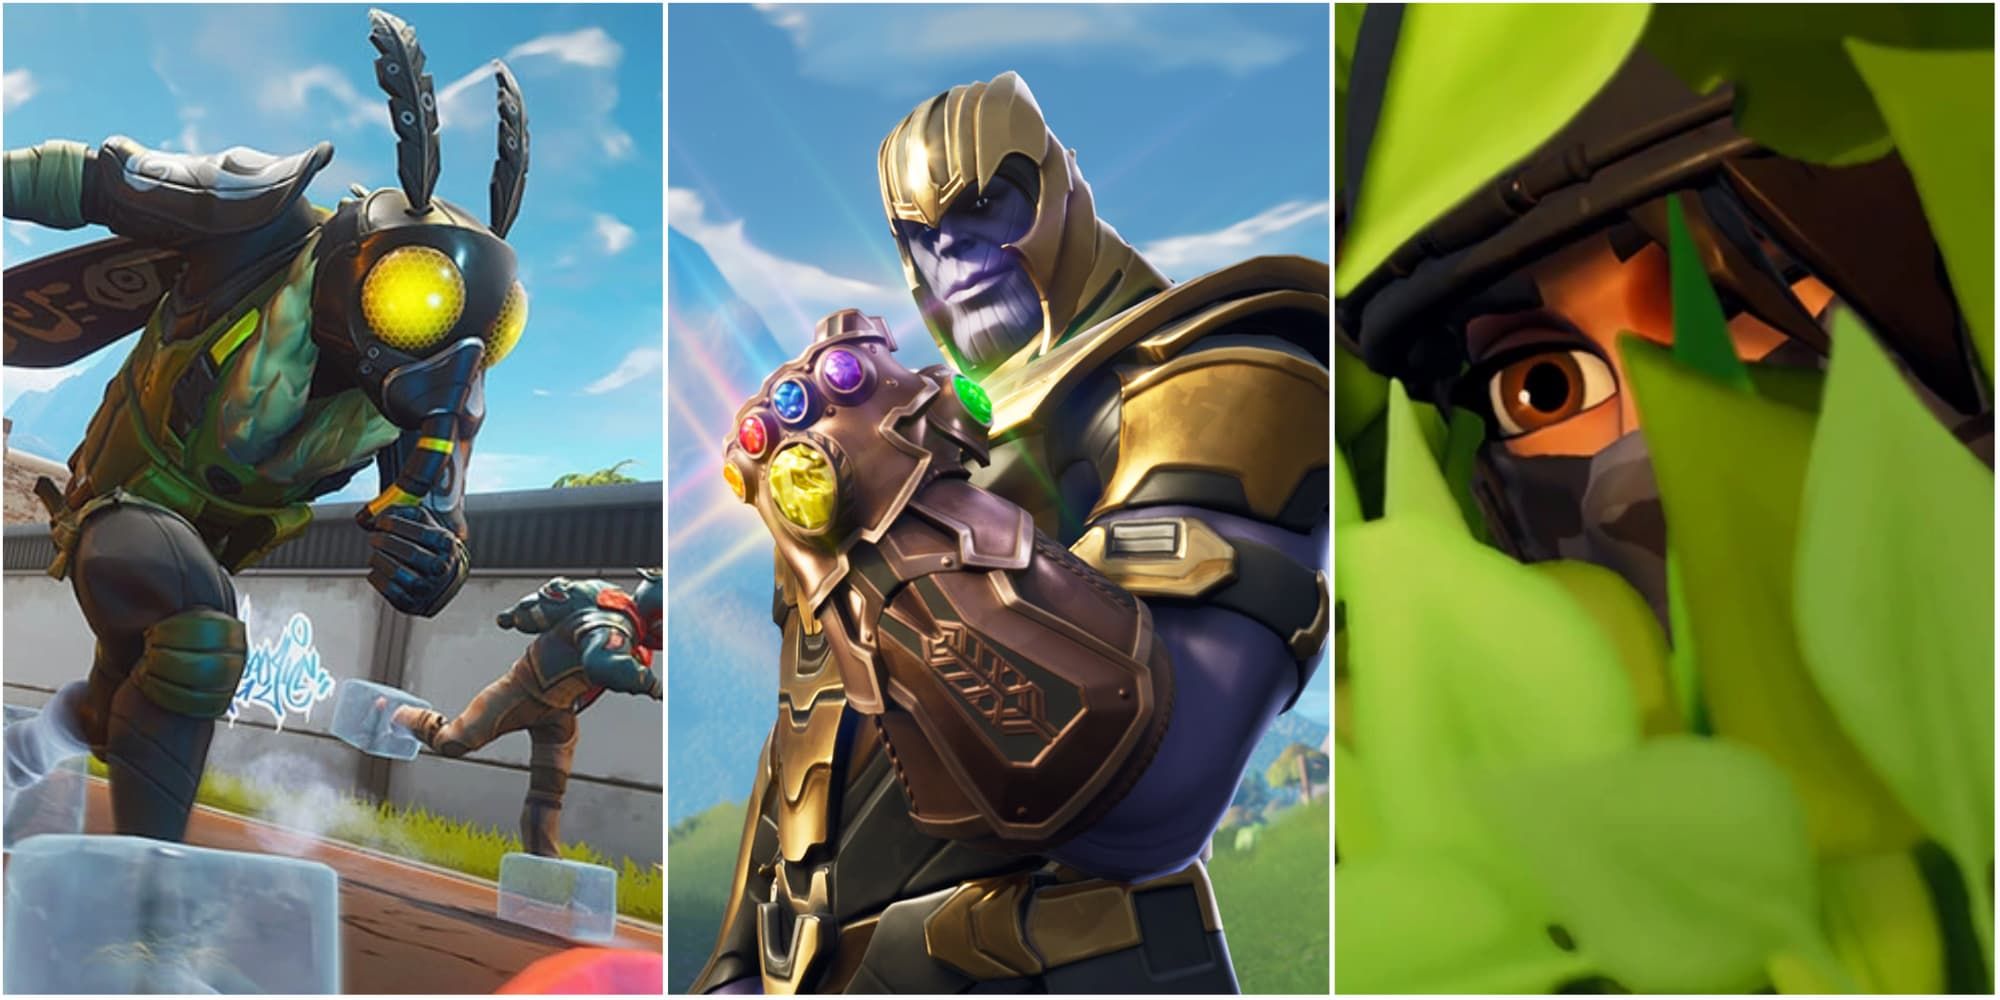 The loading screen images for the Slide, Infinity Gauntlet, and Sniper Shootout LTMs in Fortnite.